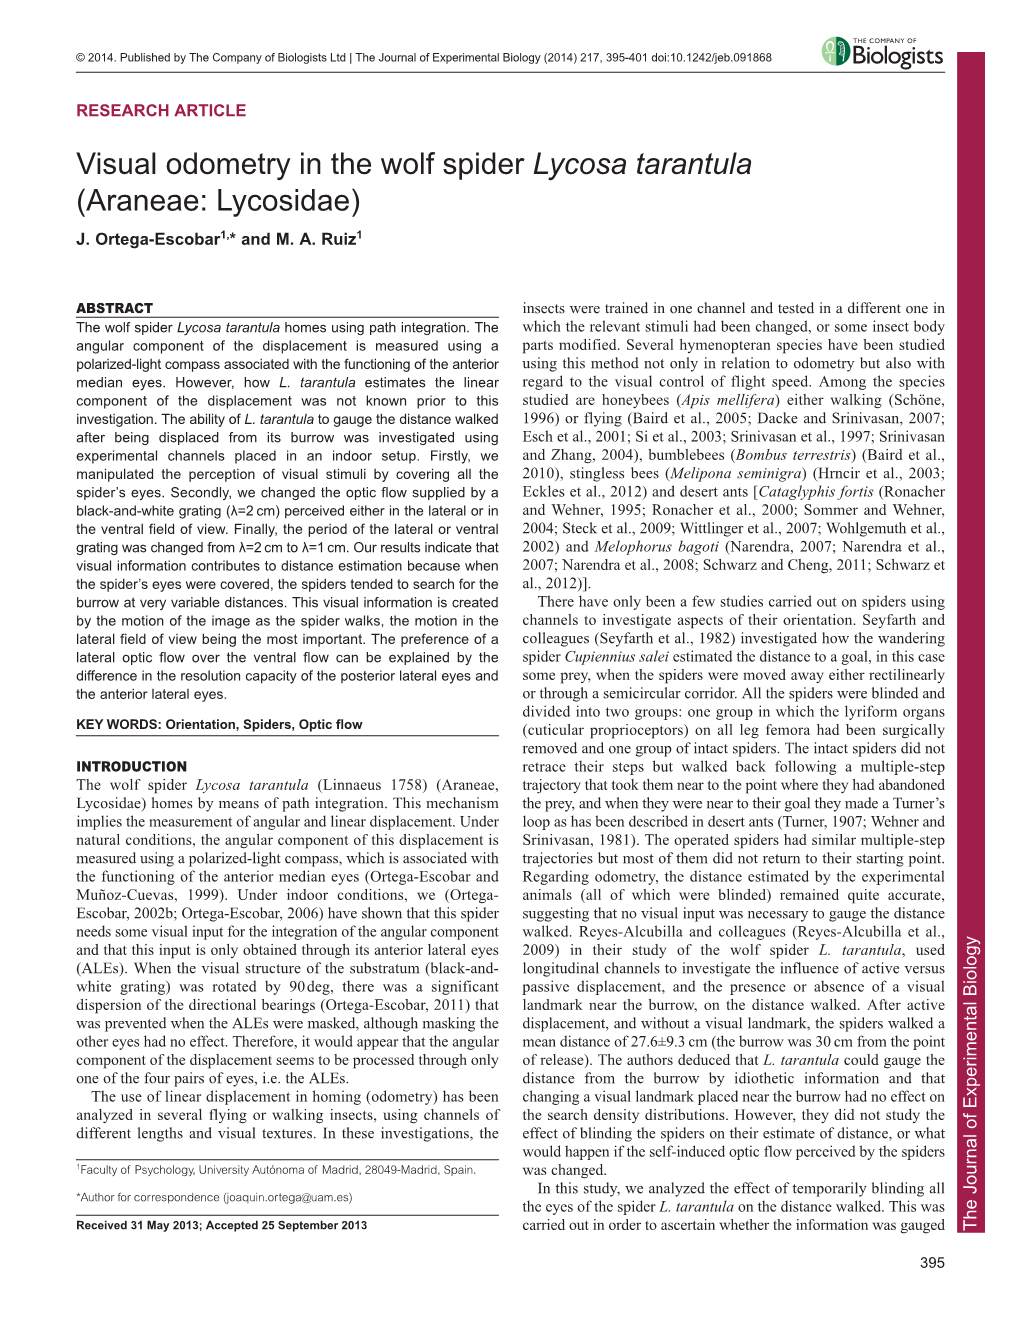 Visual Odometry in the Wolf Spider Lycosa Tarantula